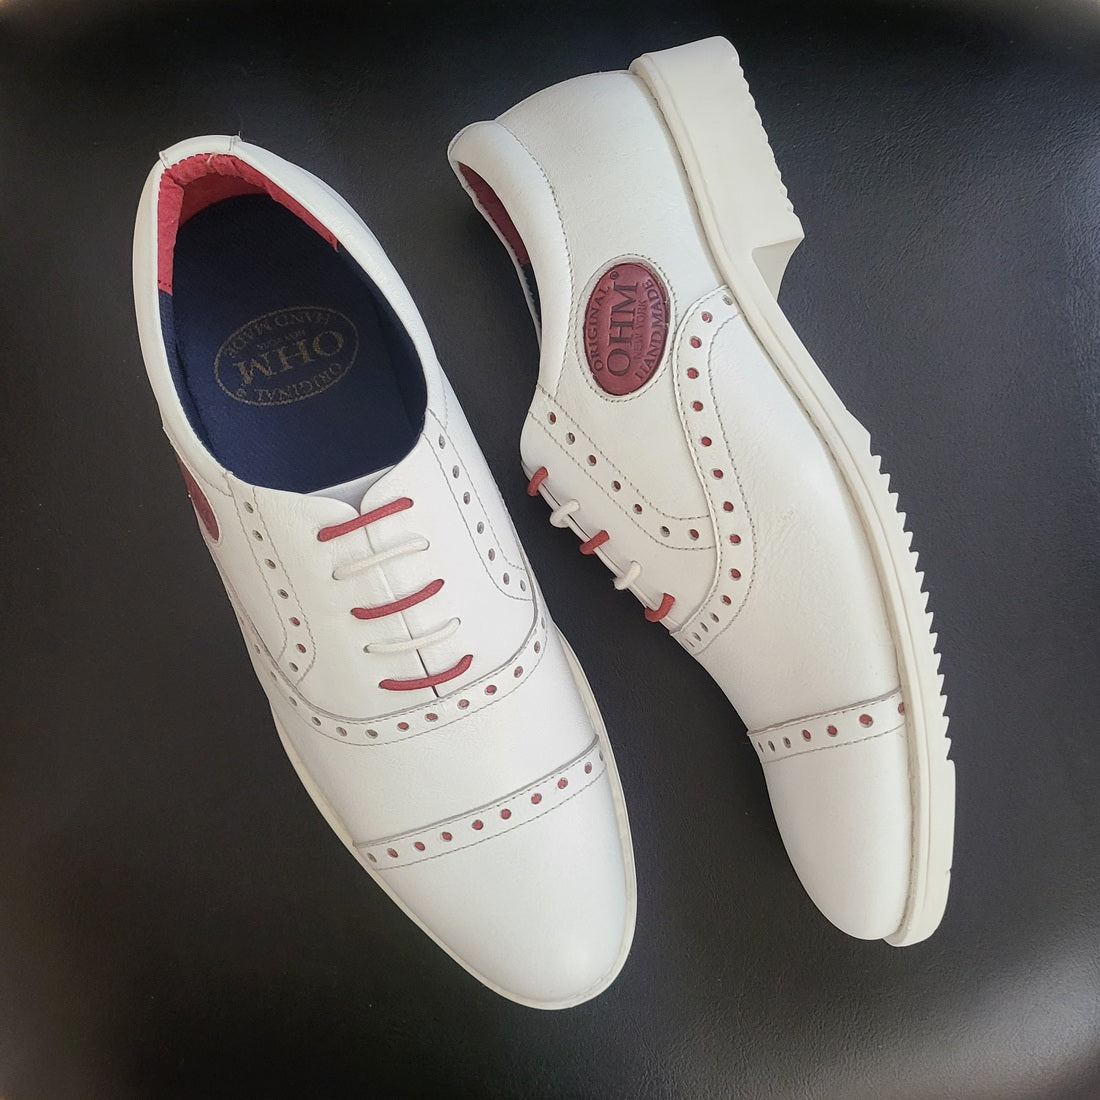 OHM New York Cap Toe Oxford Sporty Designer Leather Shoes White Color